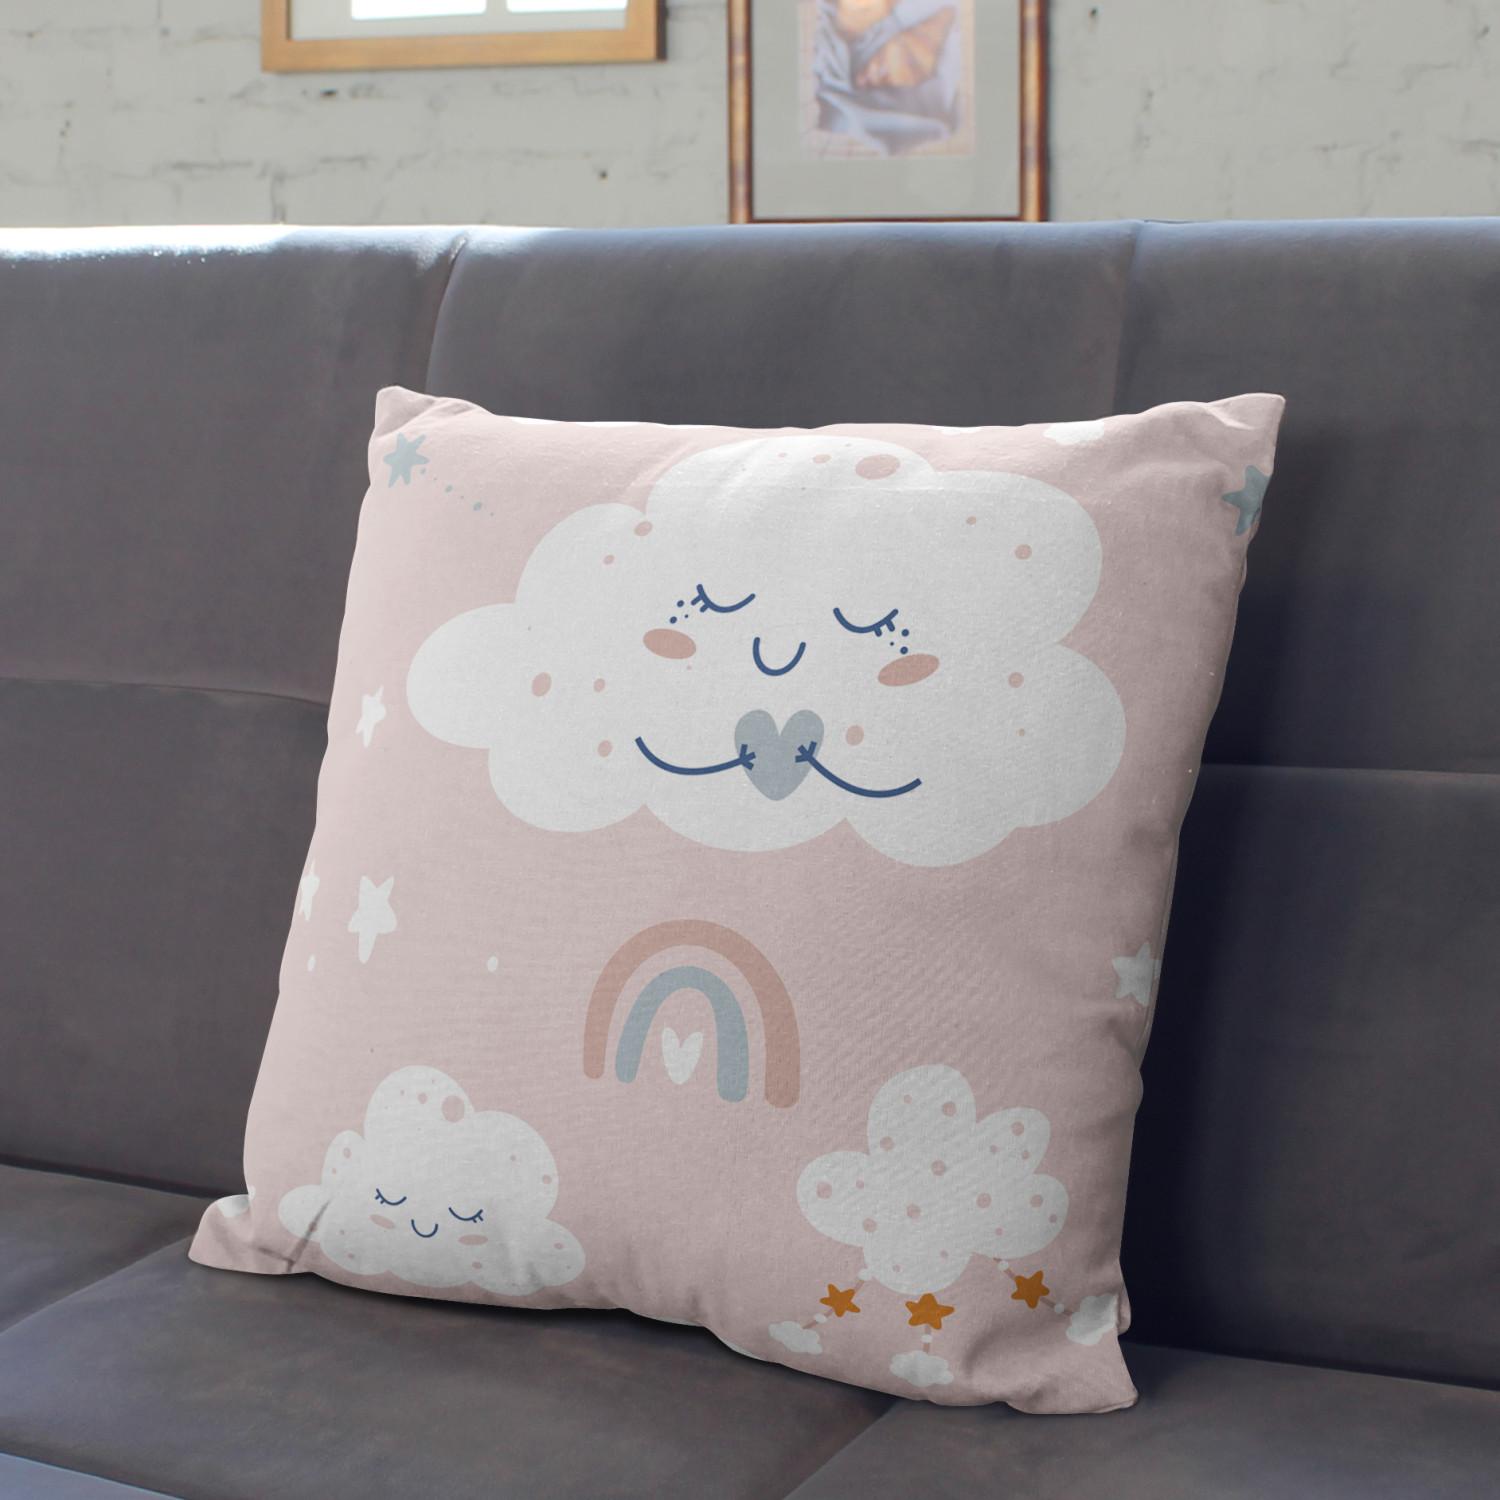 Decorative Microfiber Pillow Cloudscapes - composition in shades of white and pink cushions